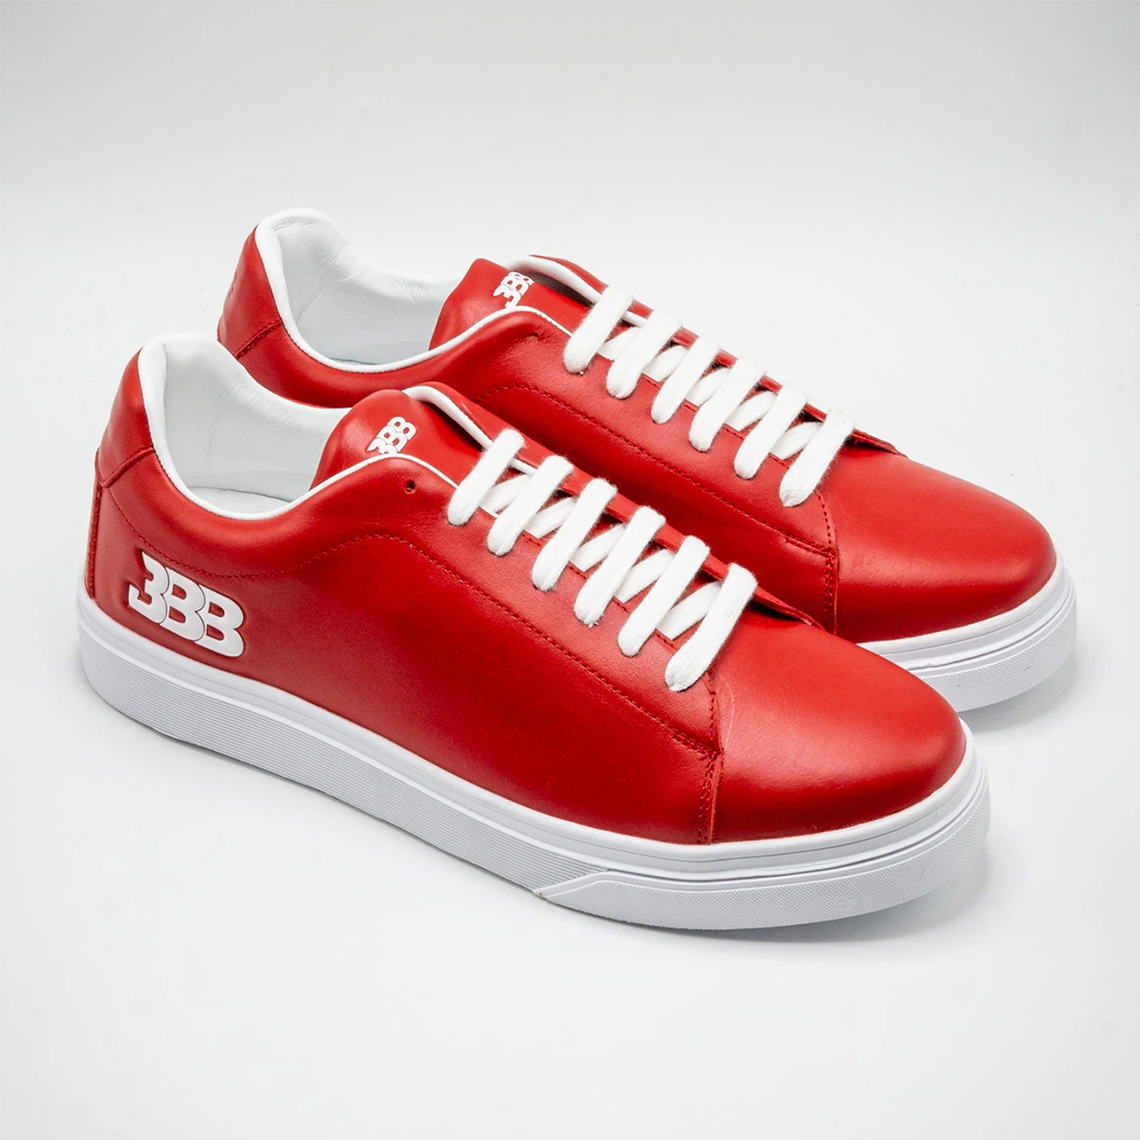 Big Baller Brand Leather Shoes 1